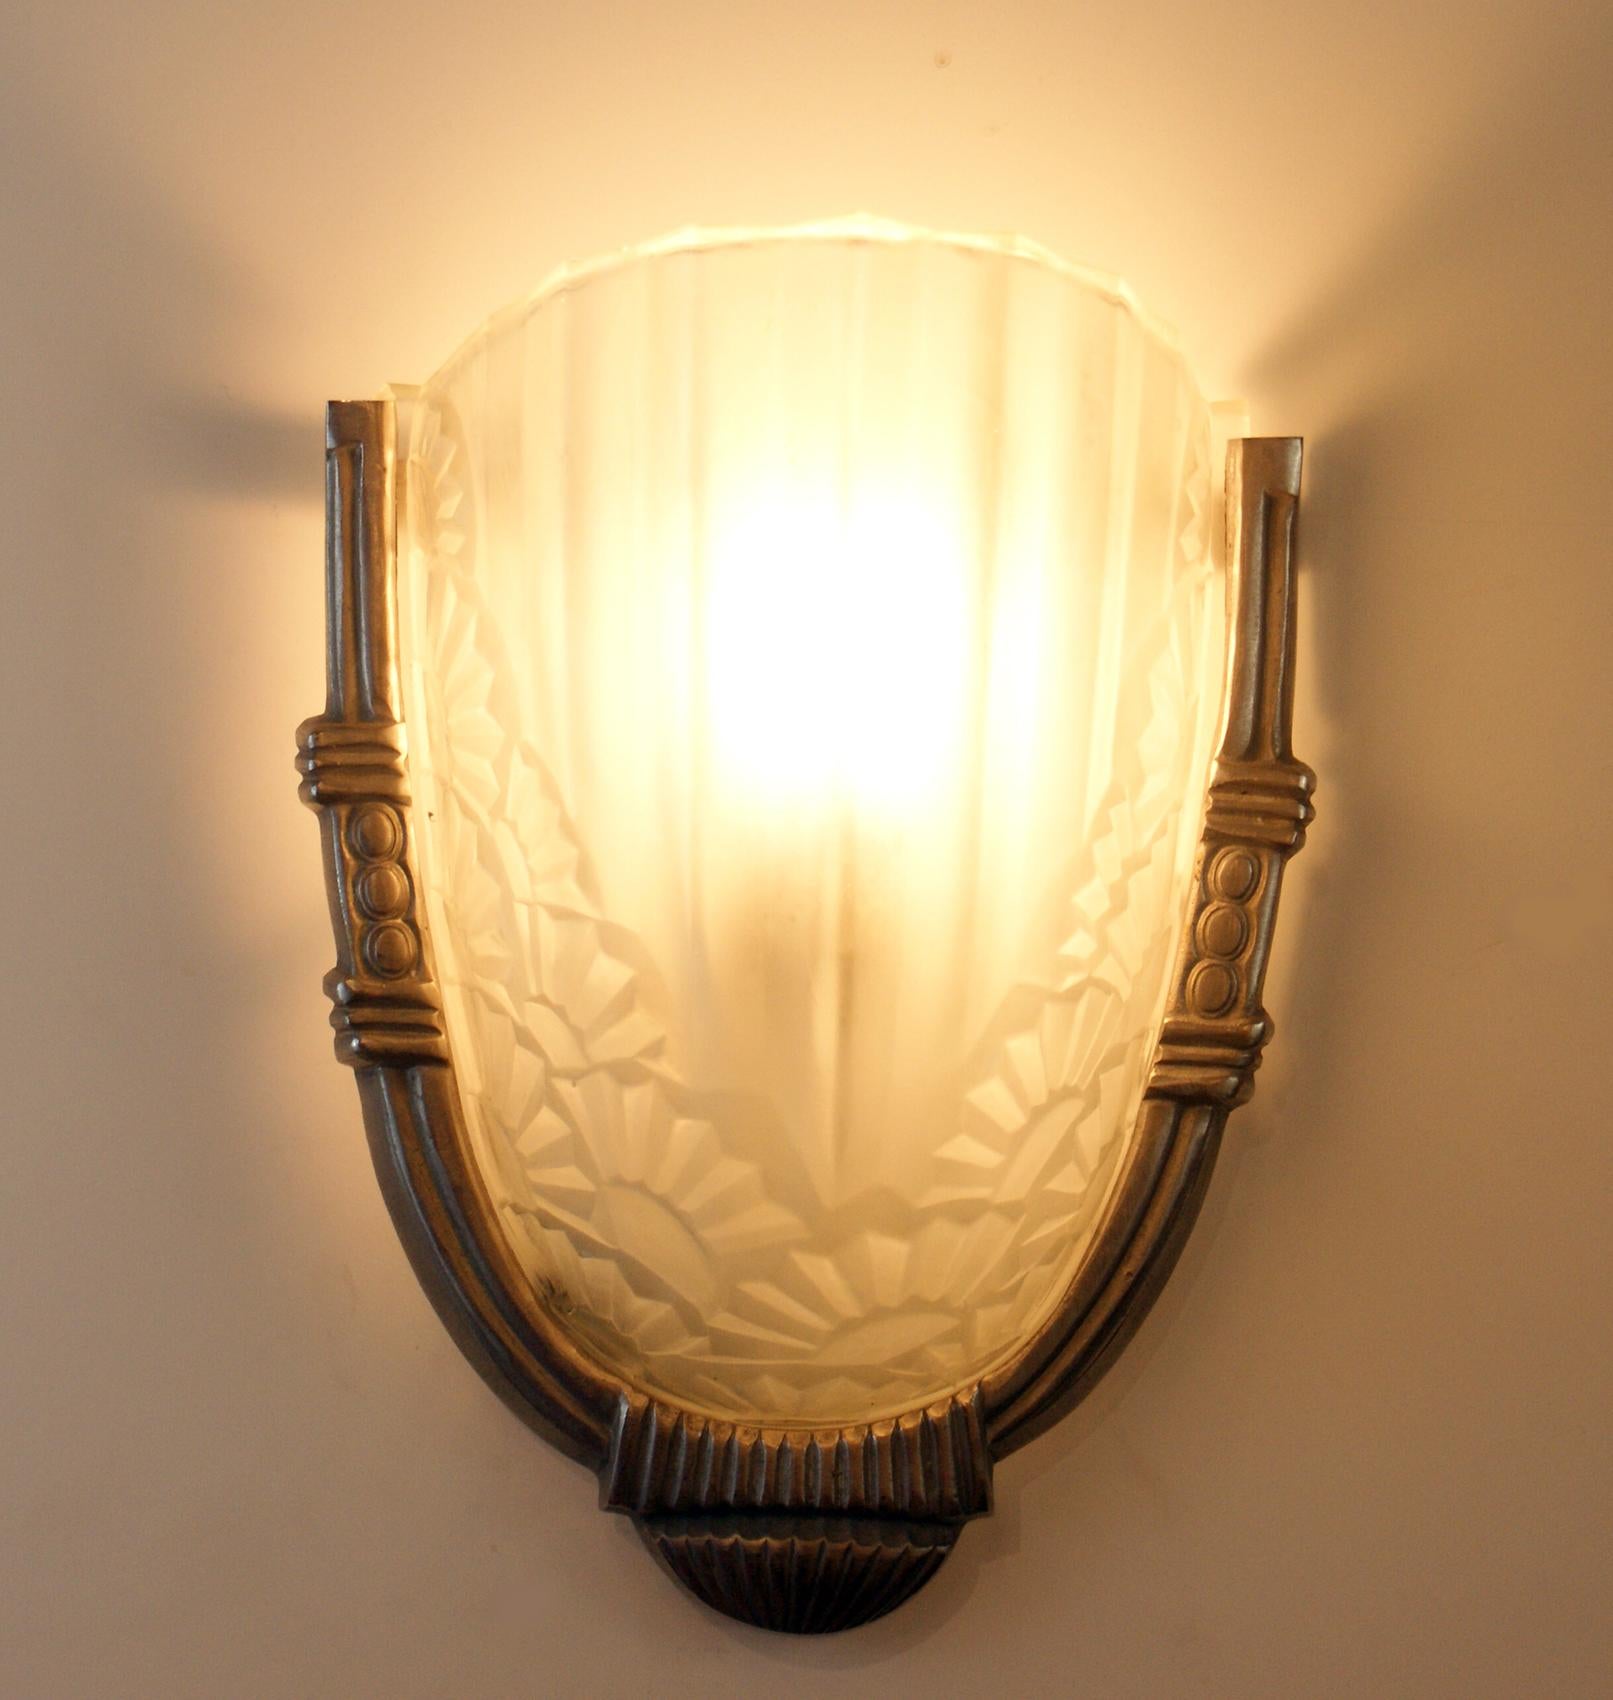 Beautiful French Art Deco scones signed “Degué” on the curved frosted glass shades with floral motif design, mounted on a geometric nickel frame.
Each sconce accommodate one candelabra bulb (60 Watt max), for a total of 120 Watts.
Can be delivered